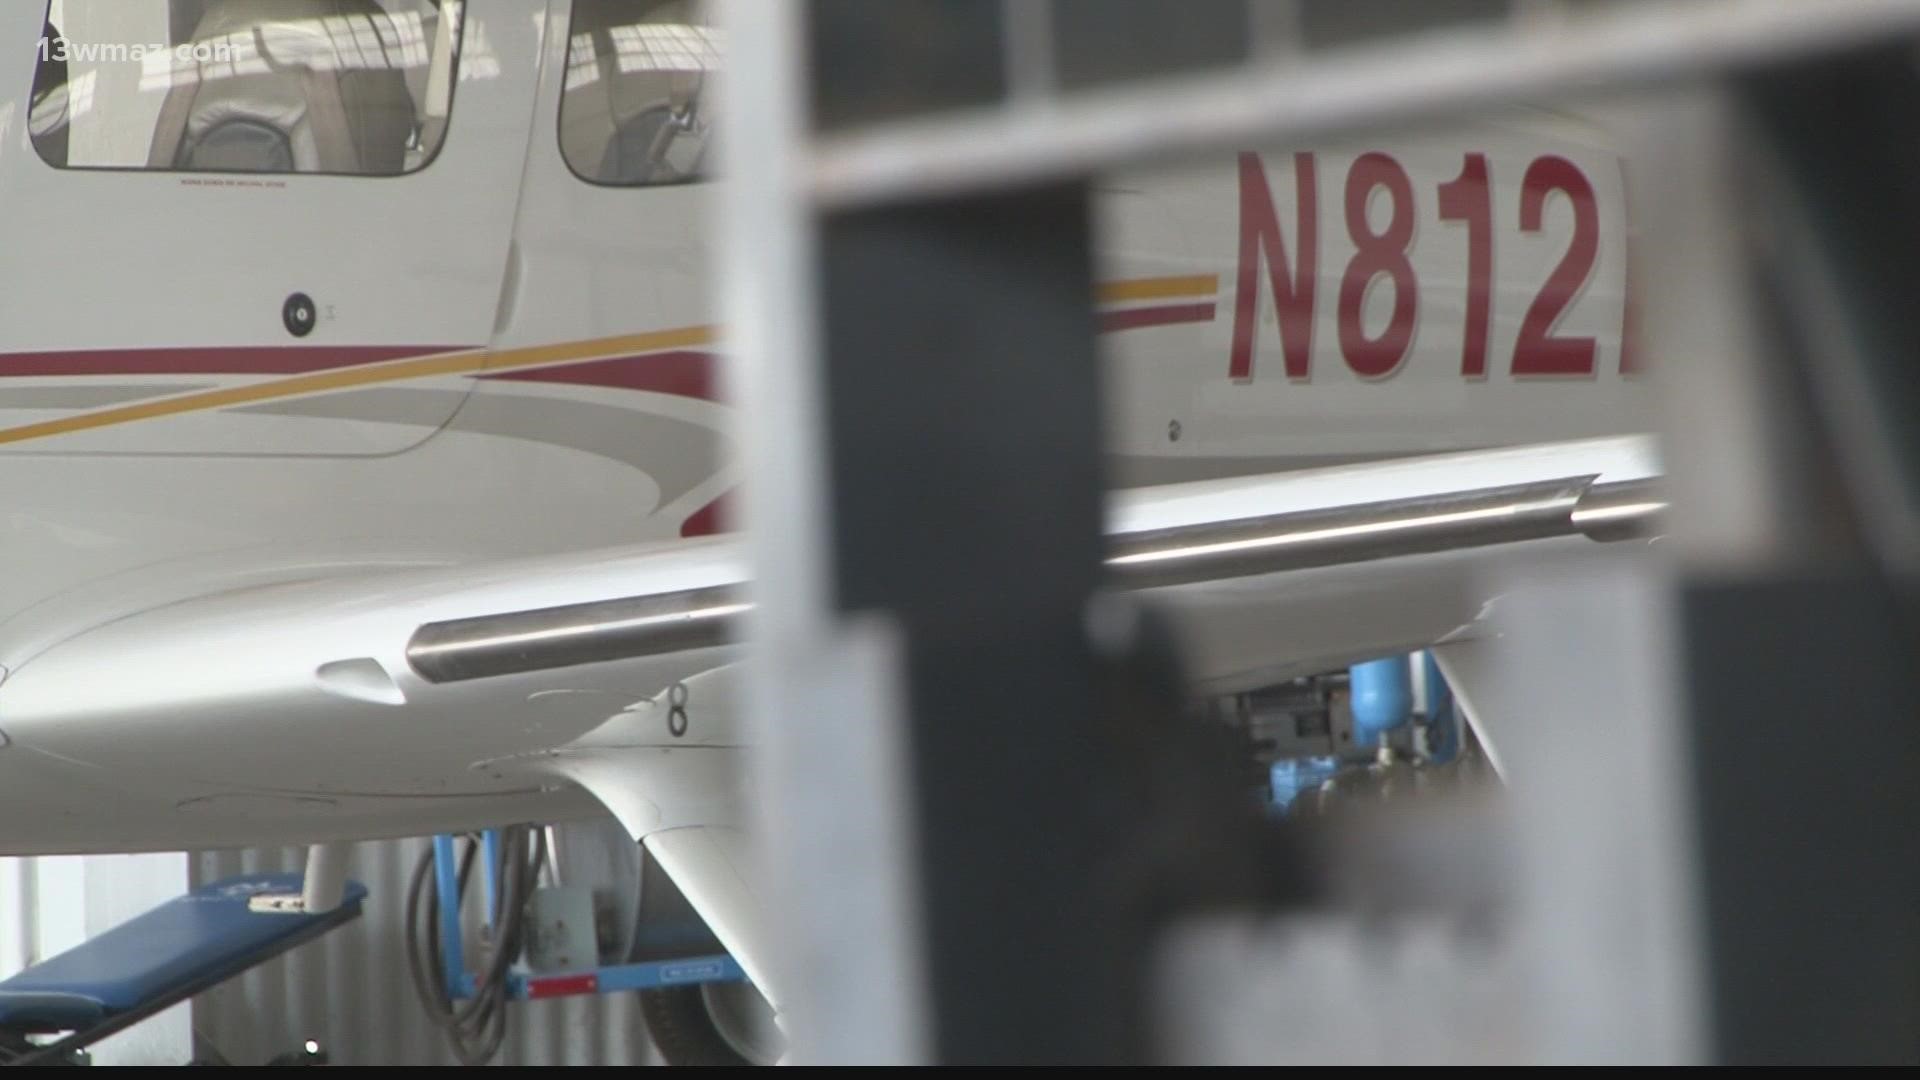 If you have experience working with planes, Bibb County has approved a plan to hire an airport director